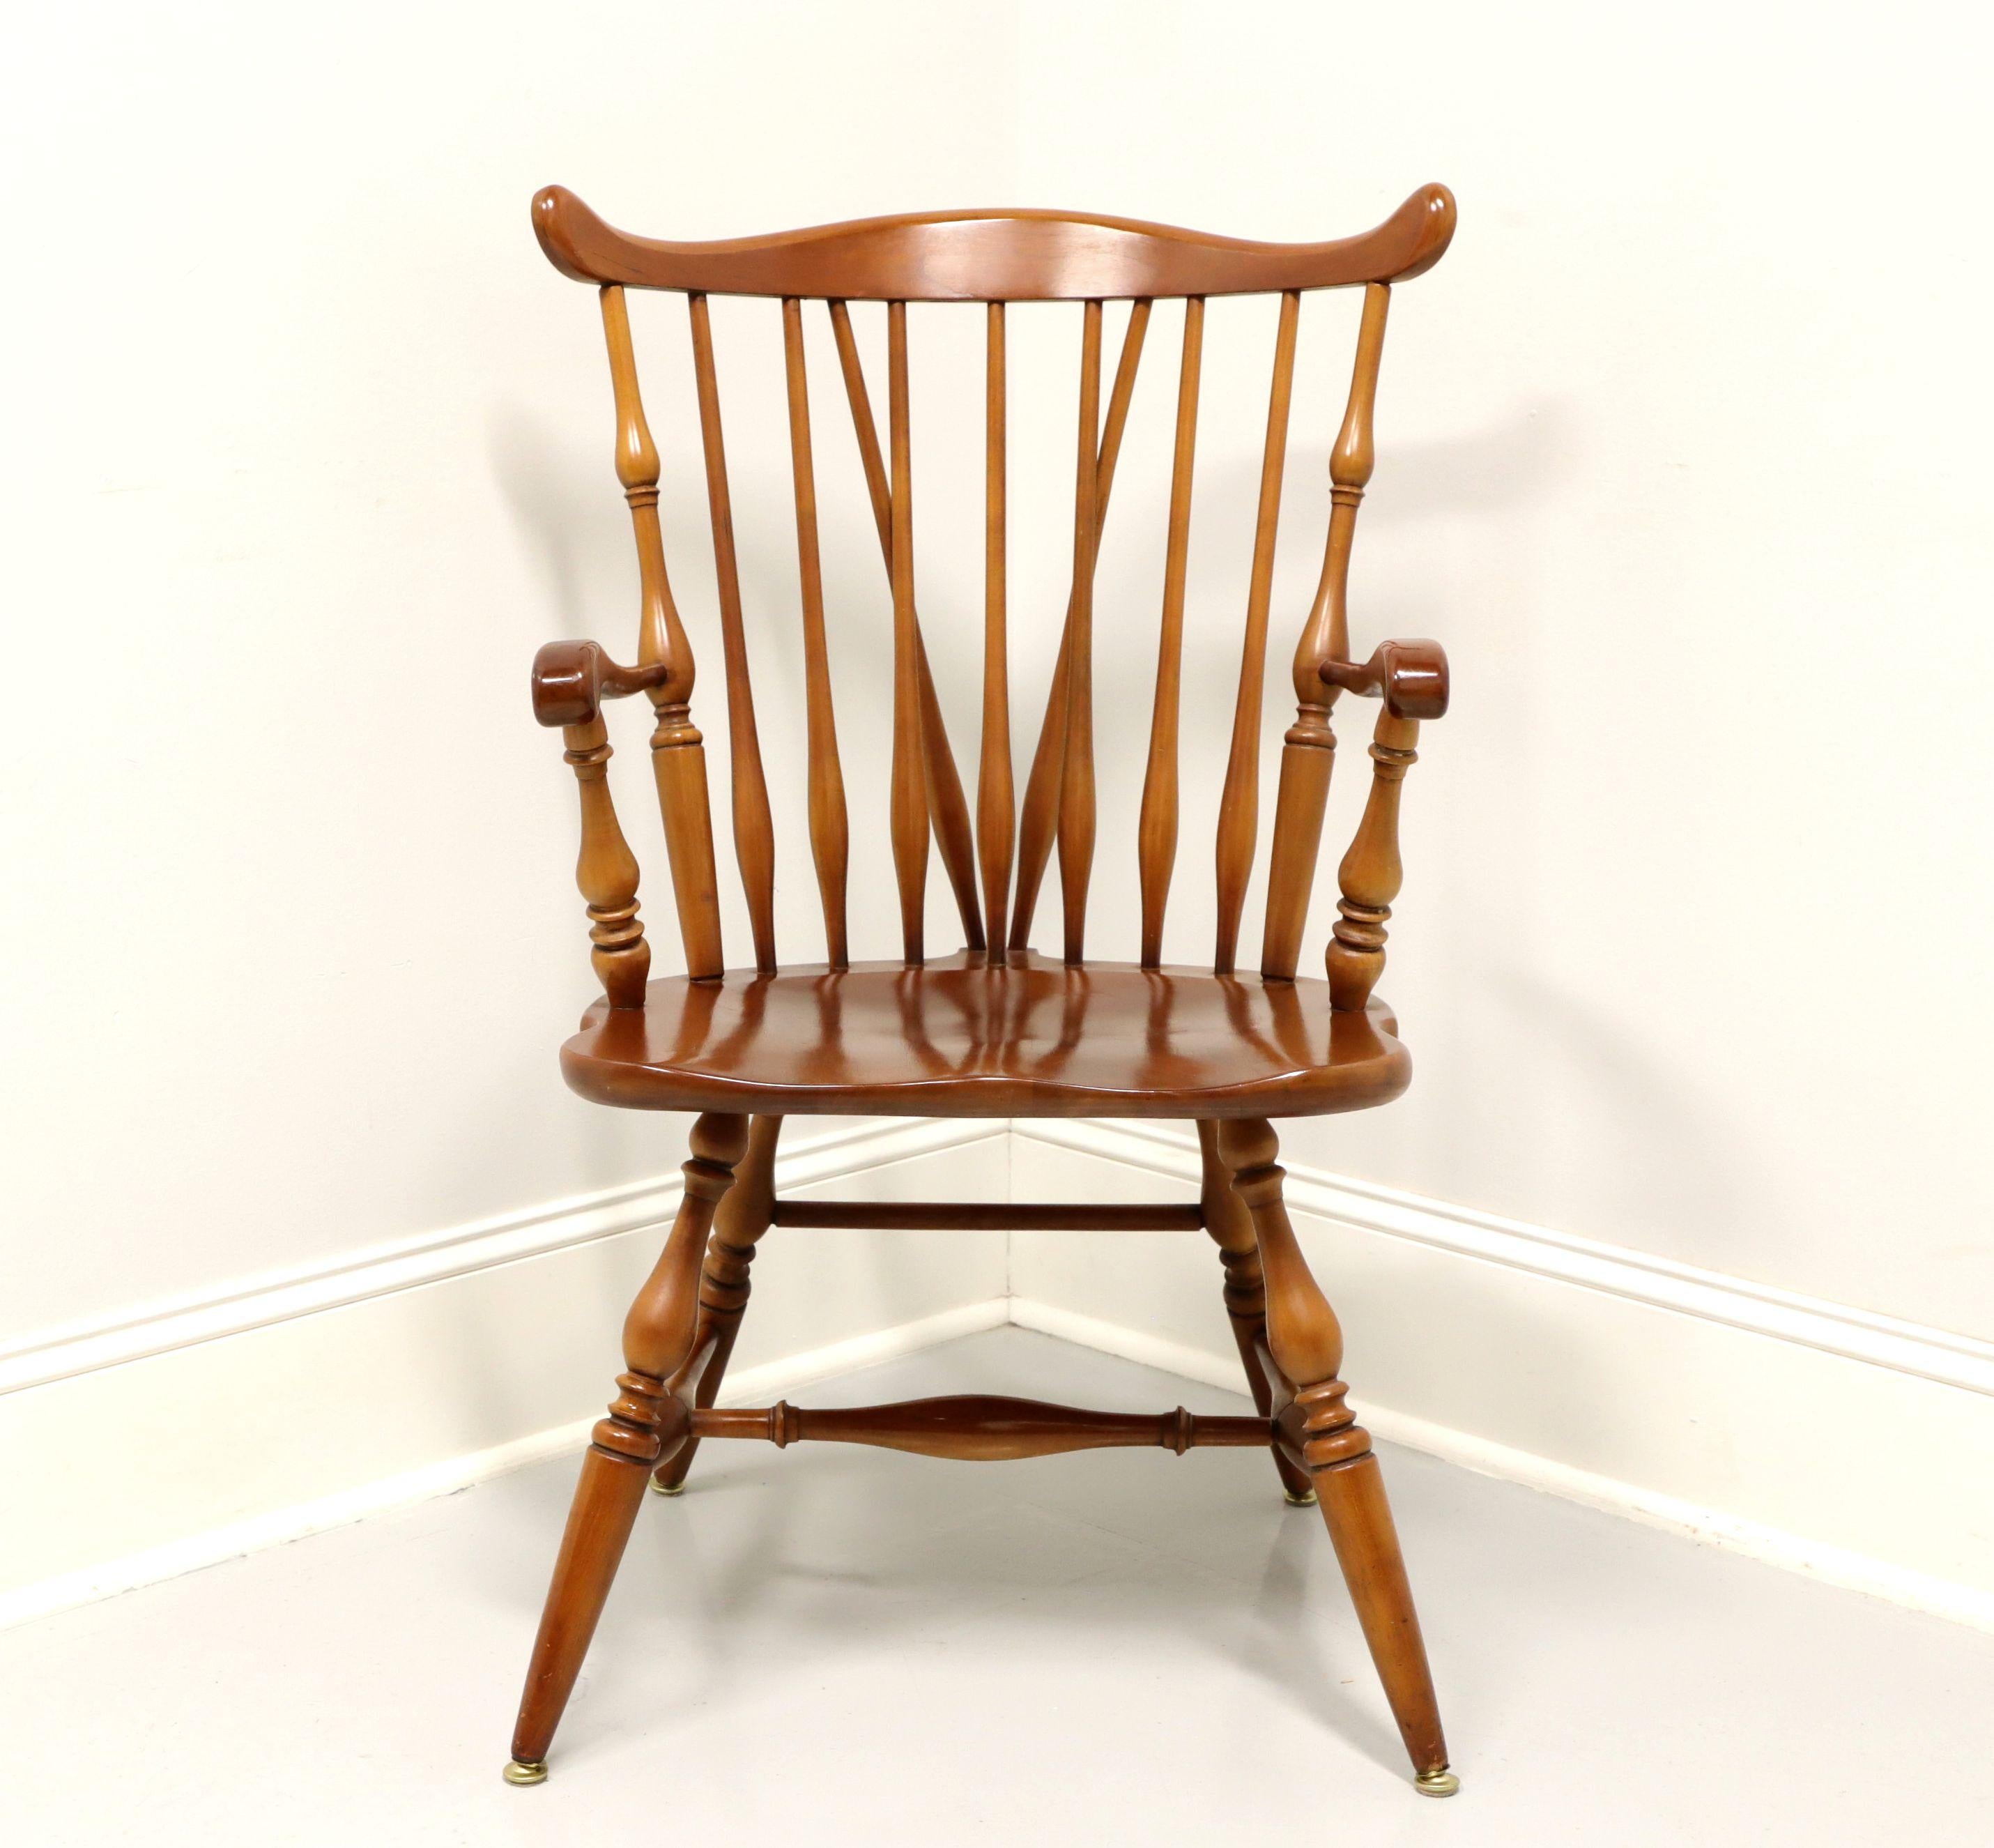 A Windsor style dining armchair by Ethan Allen, their Duxbury. Solid maple, fiddleback with turned side spindles, curved arms with turned spindle supports, saddle shape seat, tail-supports with spindles, turned legs and stretchers. Made in the USA,